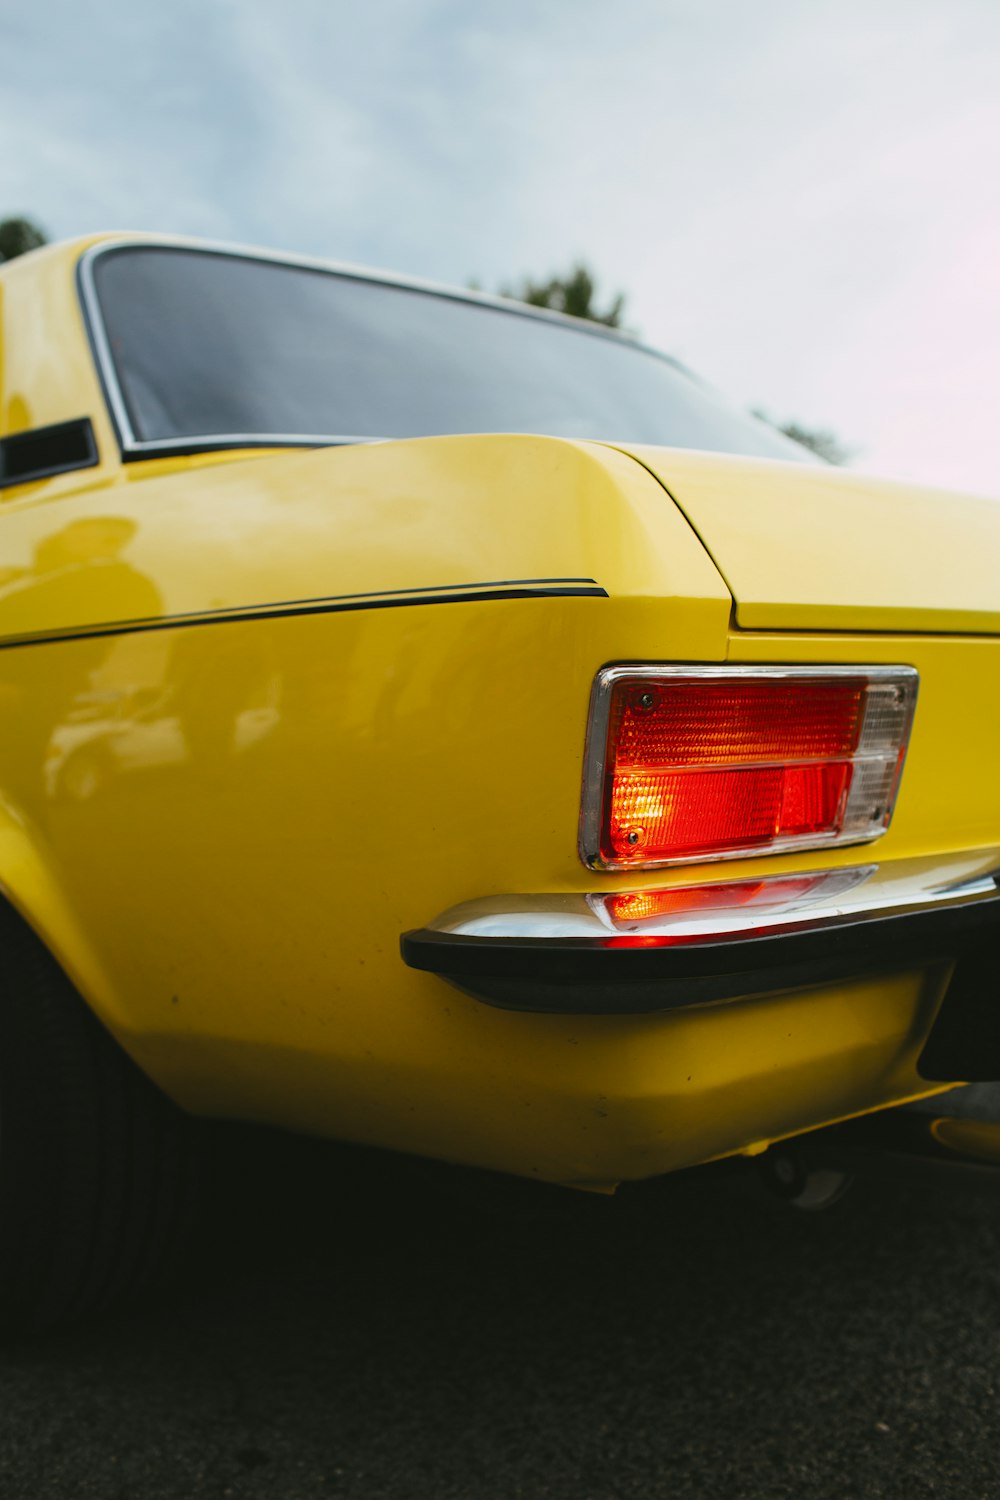 a close up of the tail lights of a yellow car